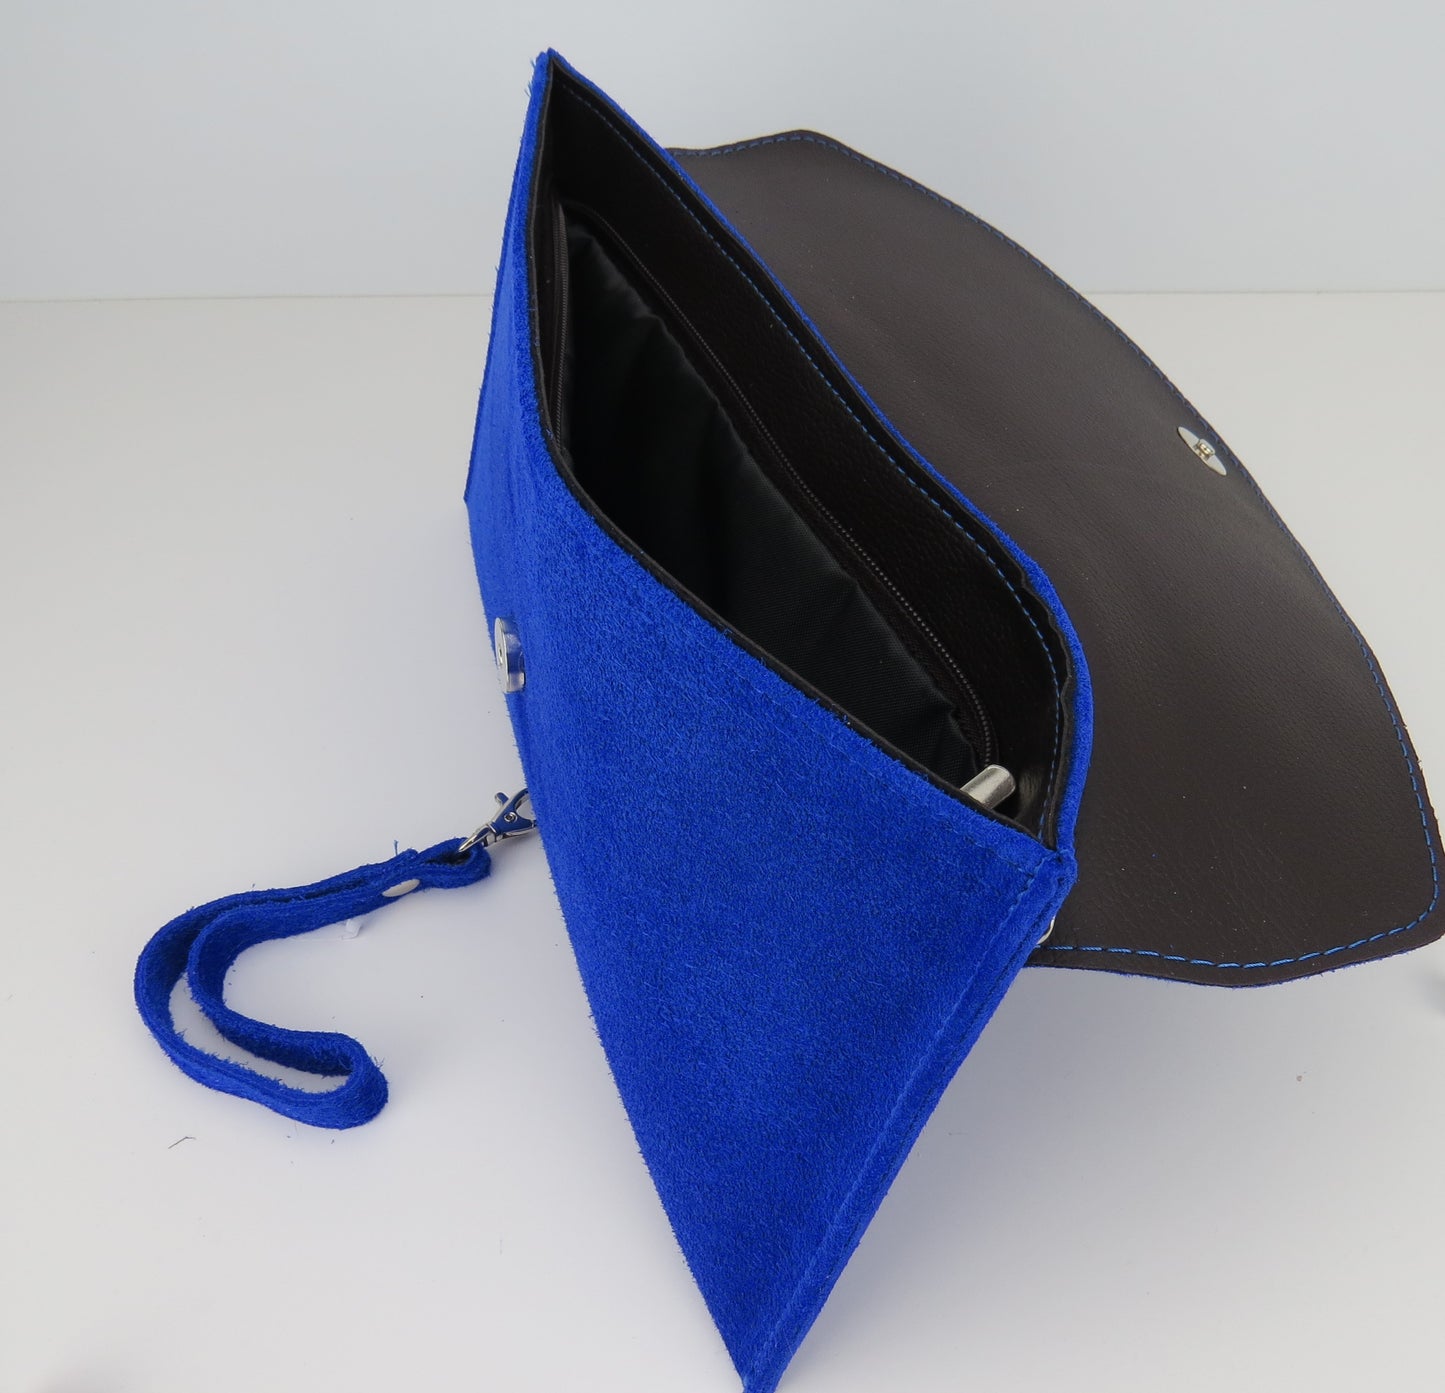 Royal Blue Suede Leather Clutch